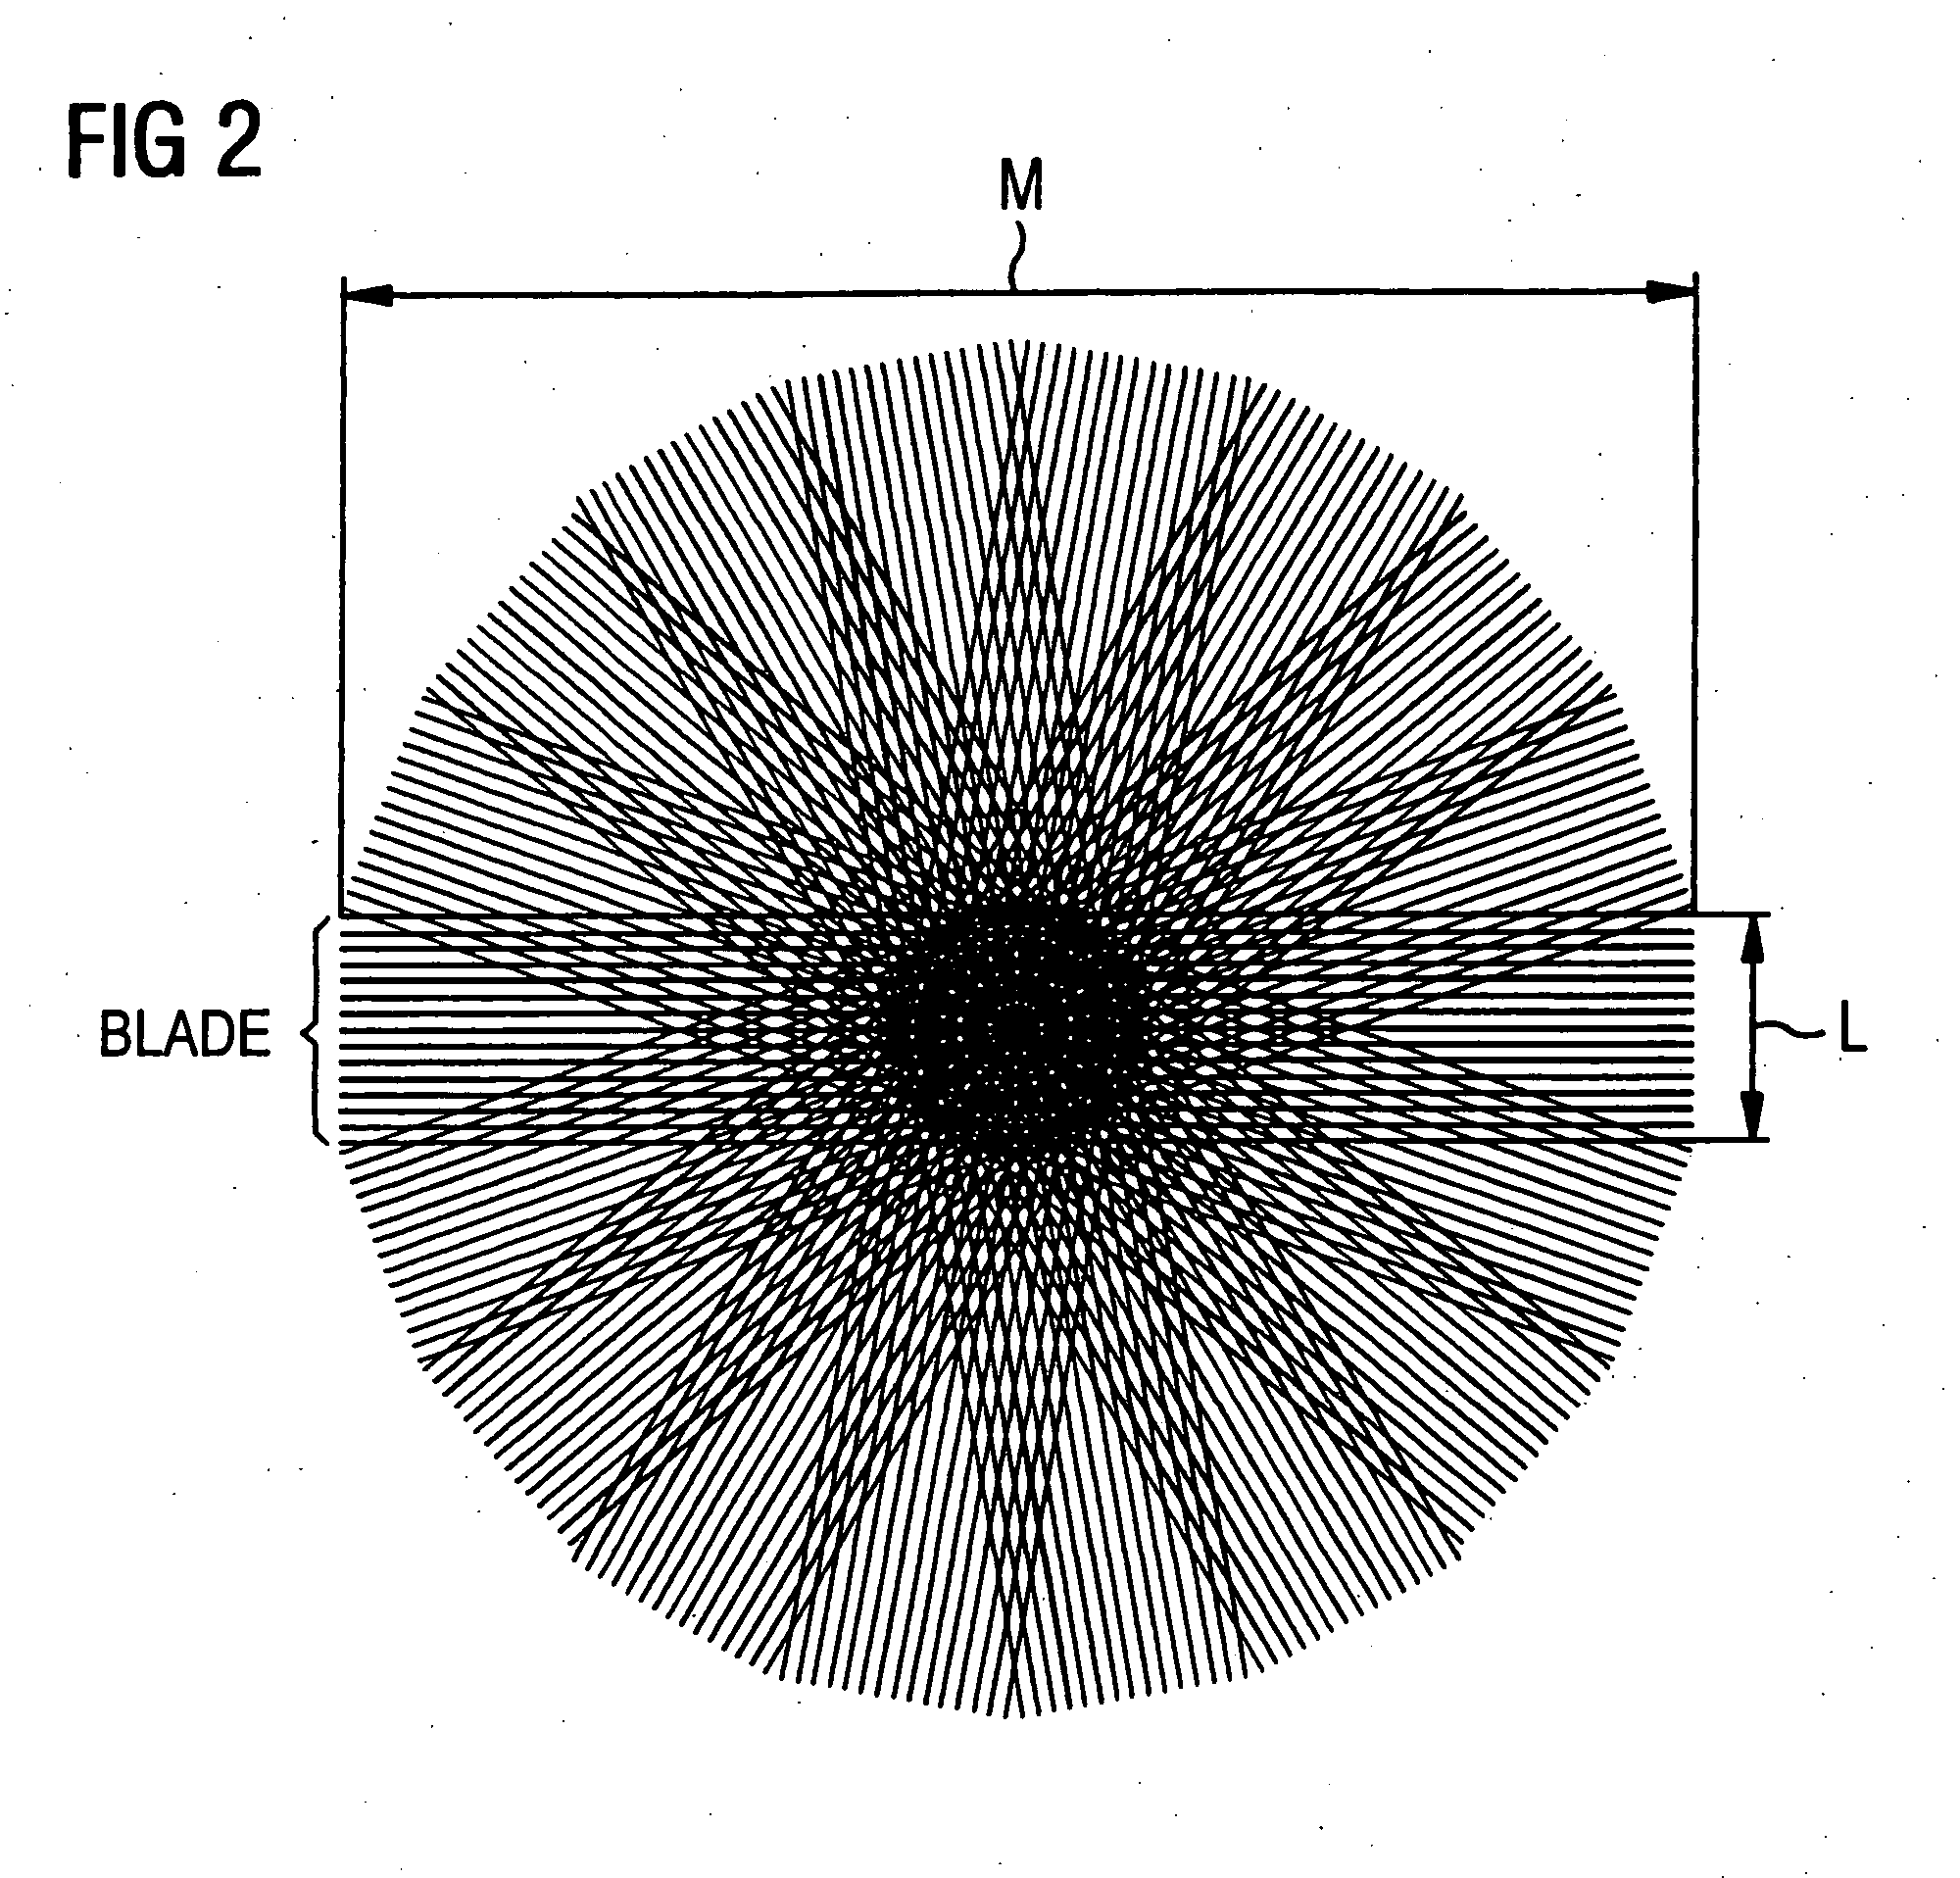 Multi-coil magnetic resonance data acquisition and image reconstruction method and apparatus using blade-like k-space sampling